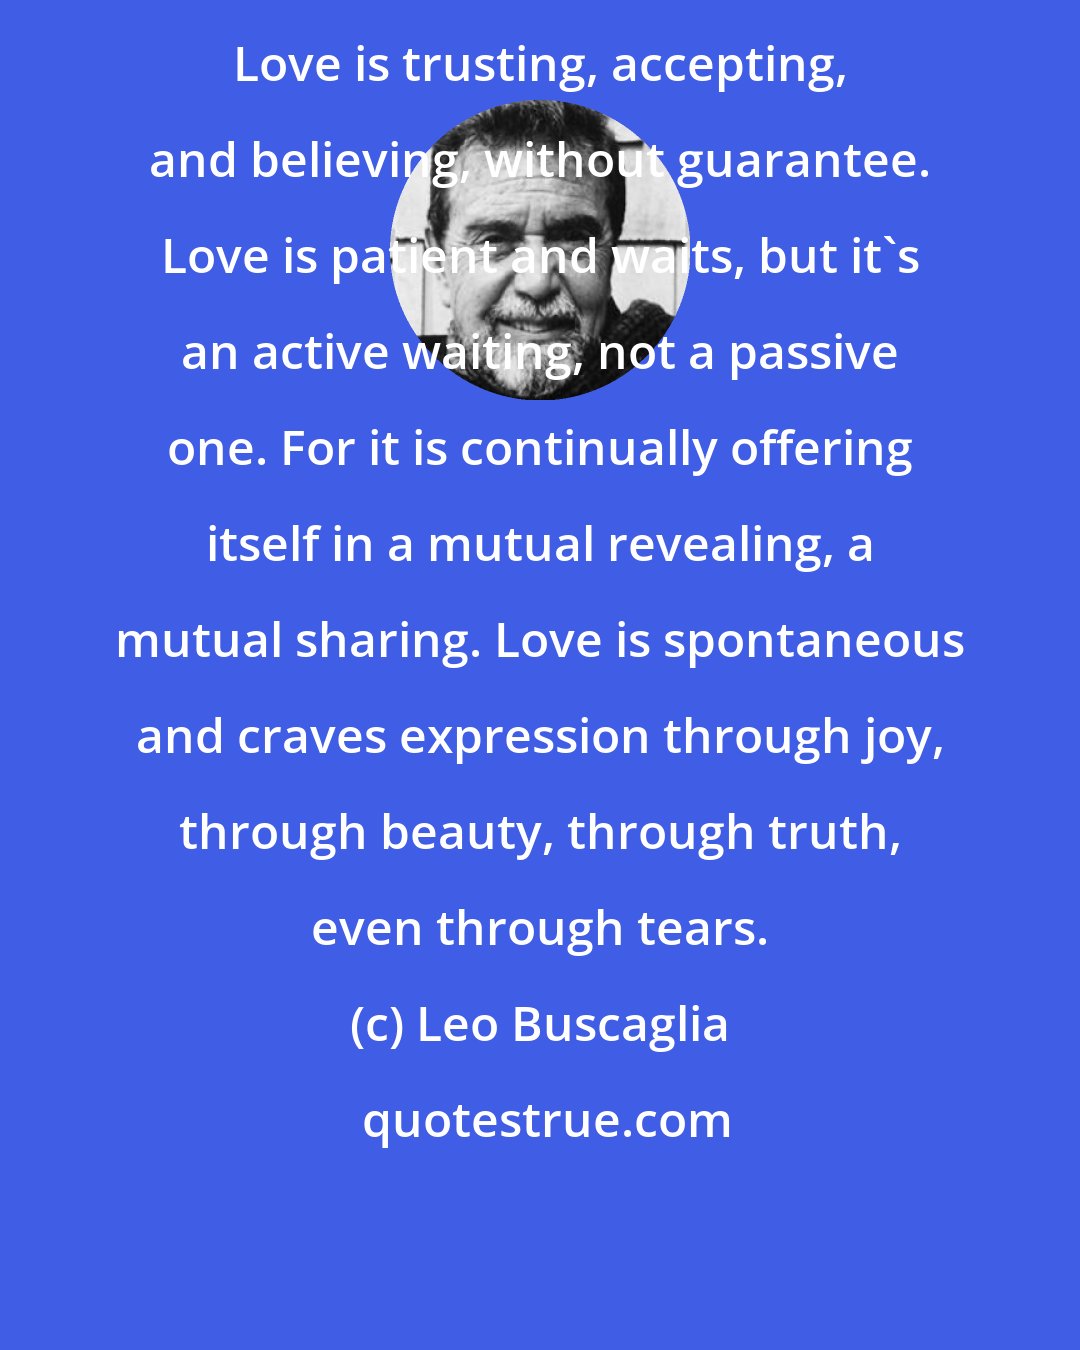 Leo Buscaglia: Love is trusting, accepting, and believing, without guarantee. Love is patient and waits, but it's an active waiting, not a passive one. For it is continually offering itself in a mutual revealing, a mutual sharing. Love is spontaneous and craves expression through joy, through beauty, through truth, even through tears.